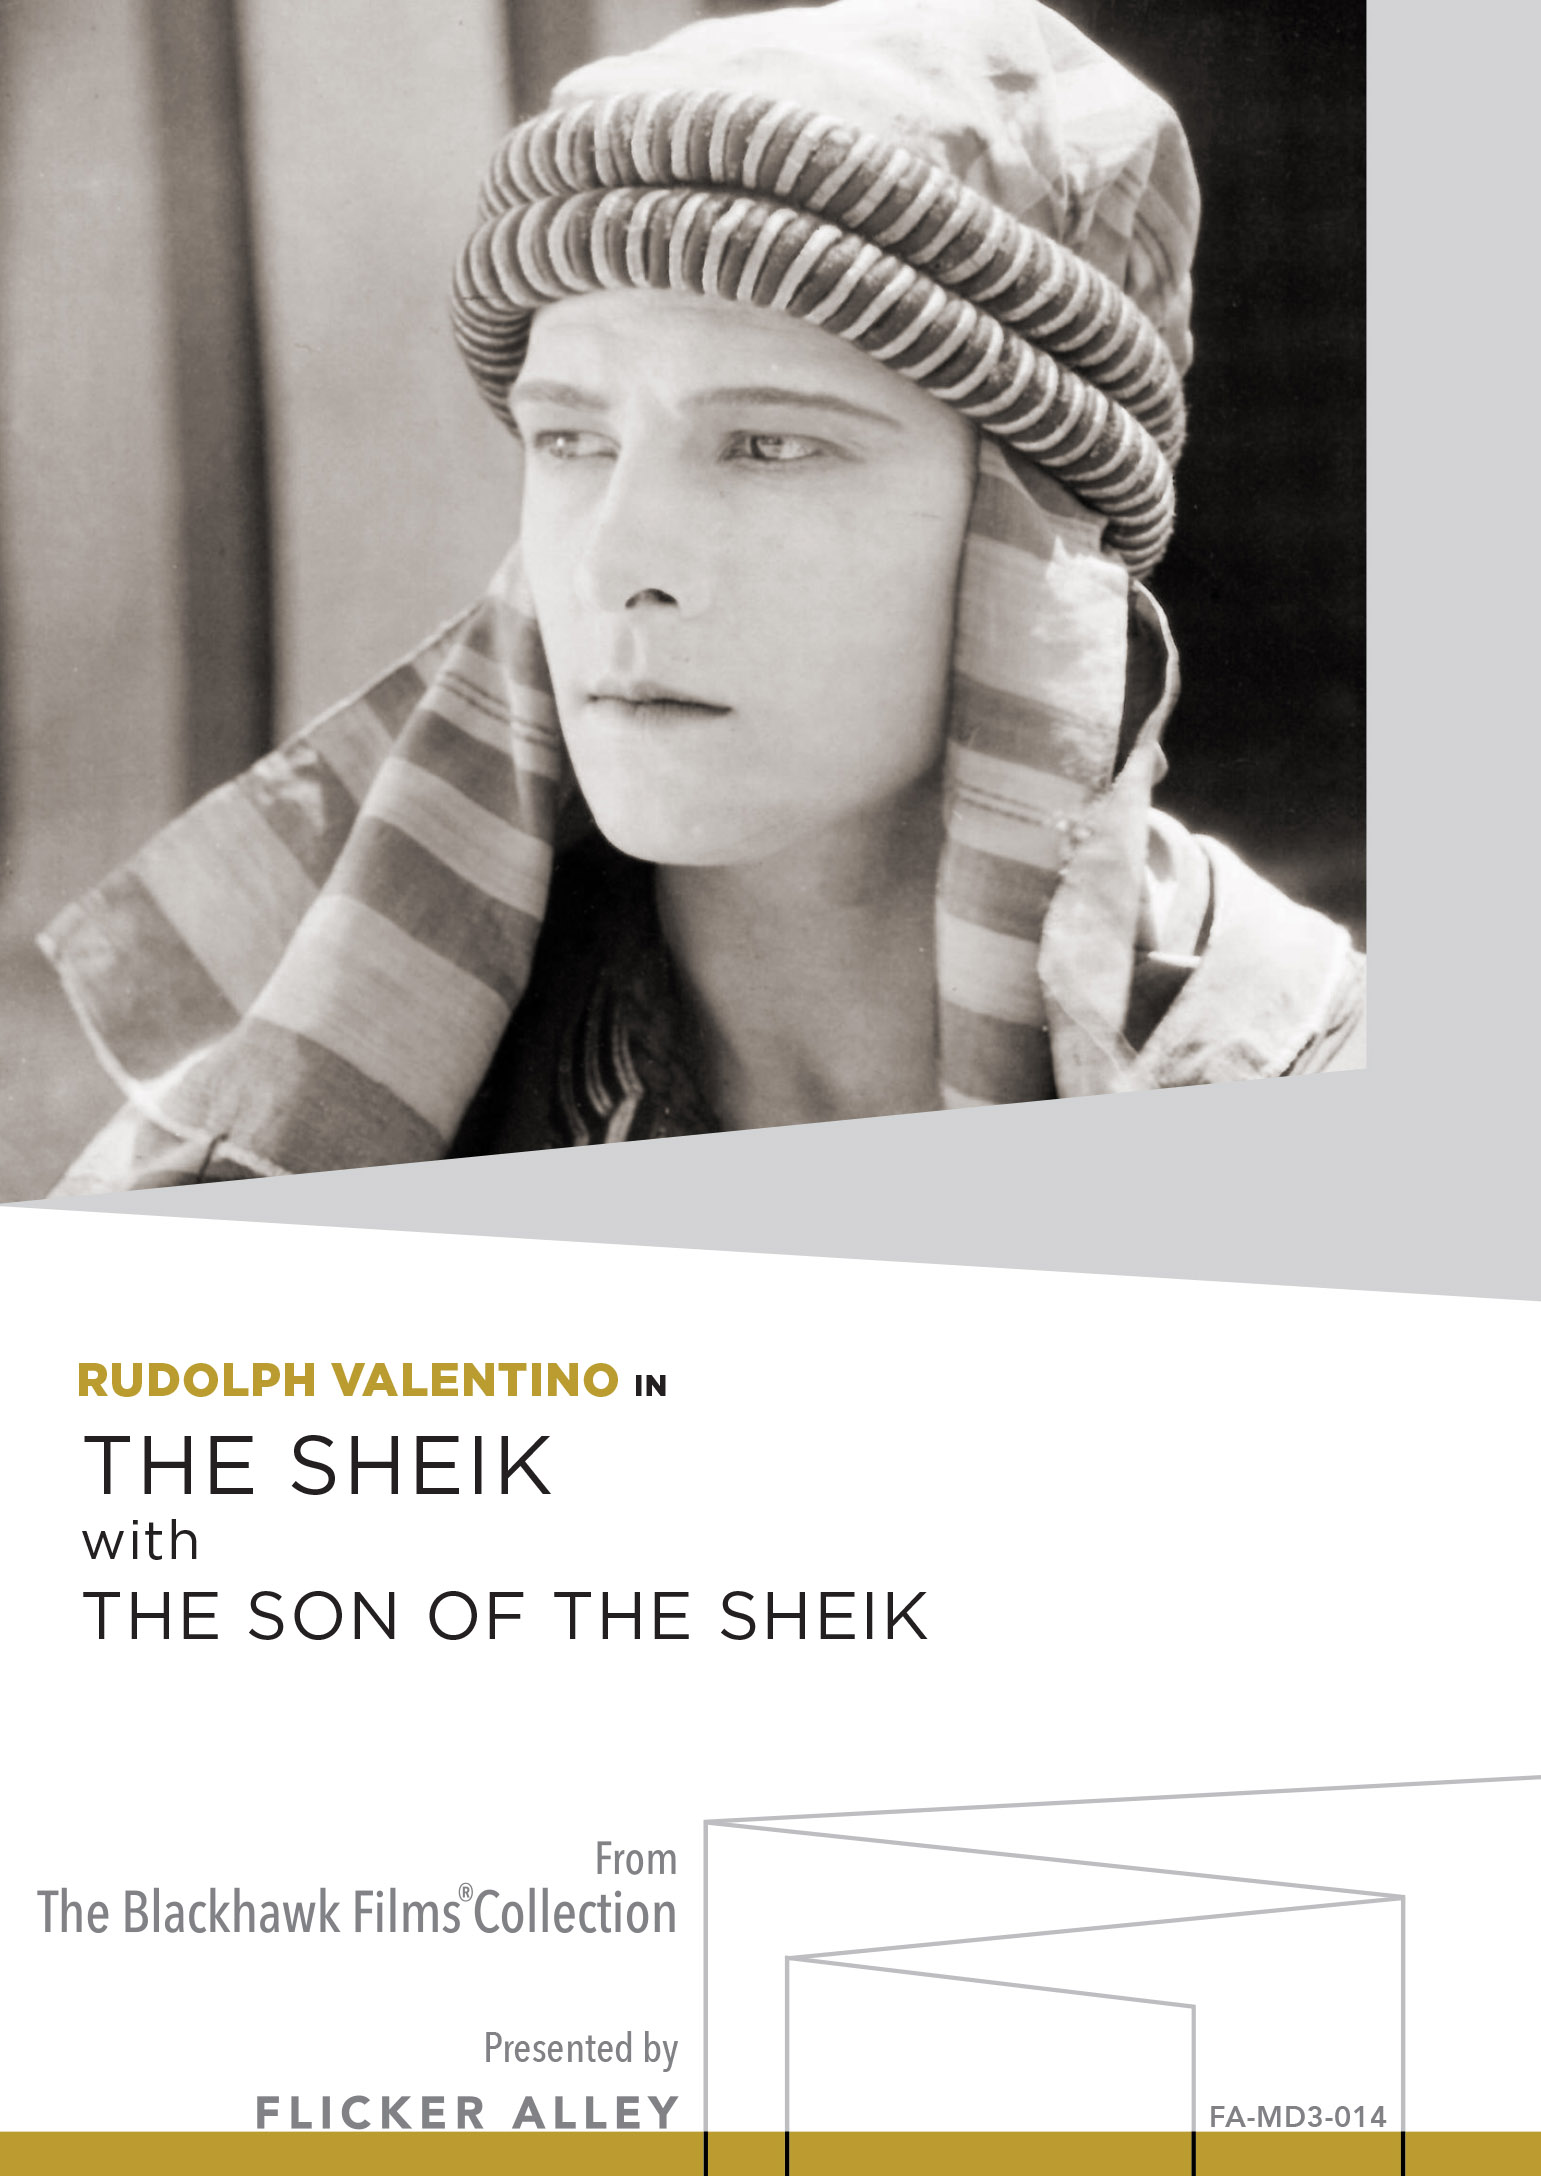 The Sheik with The Son of The Sheik MOD DVD Flicker Alley Silent Film Blu-ray DVD Stream buy MOD